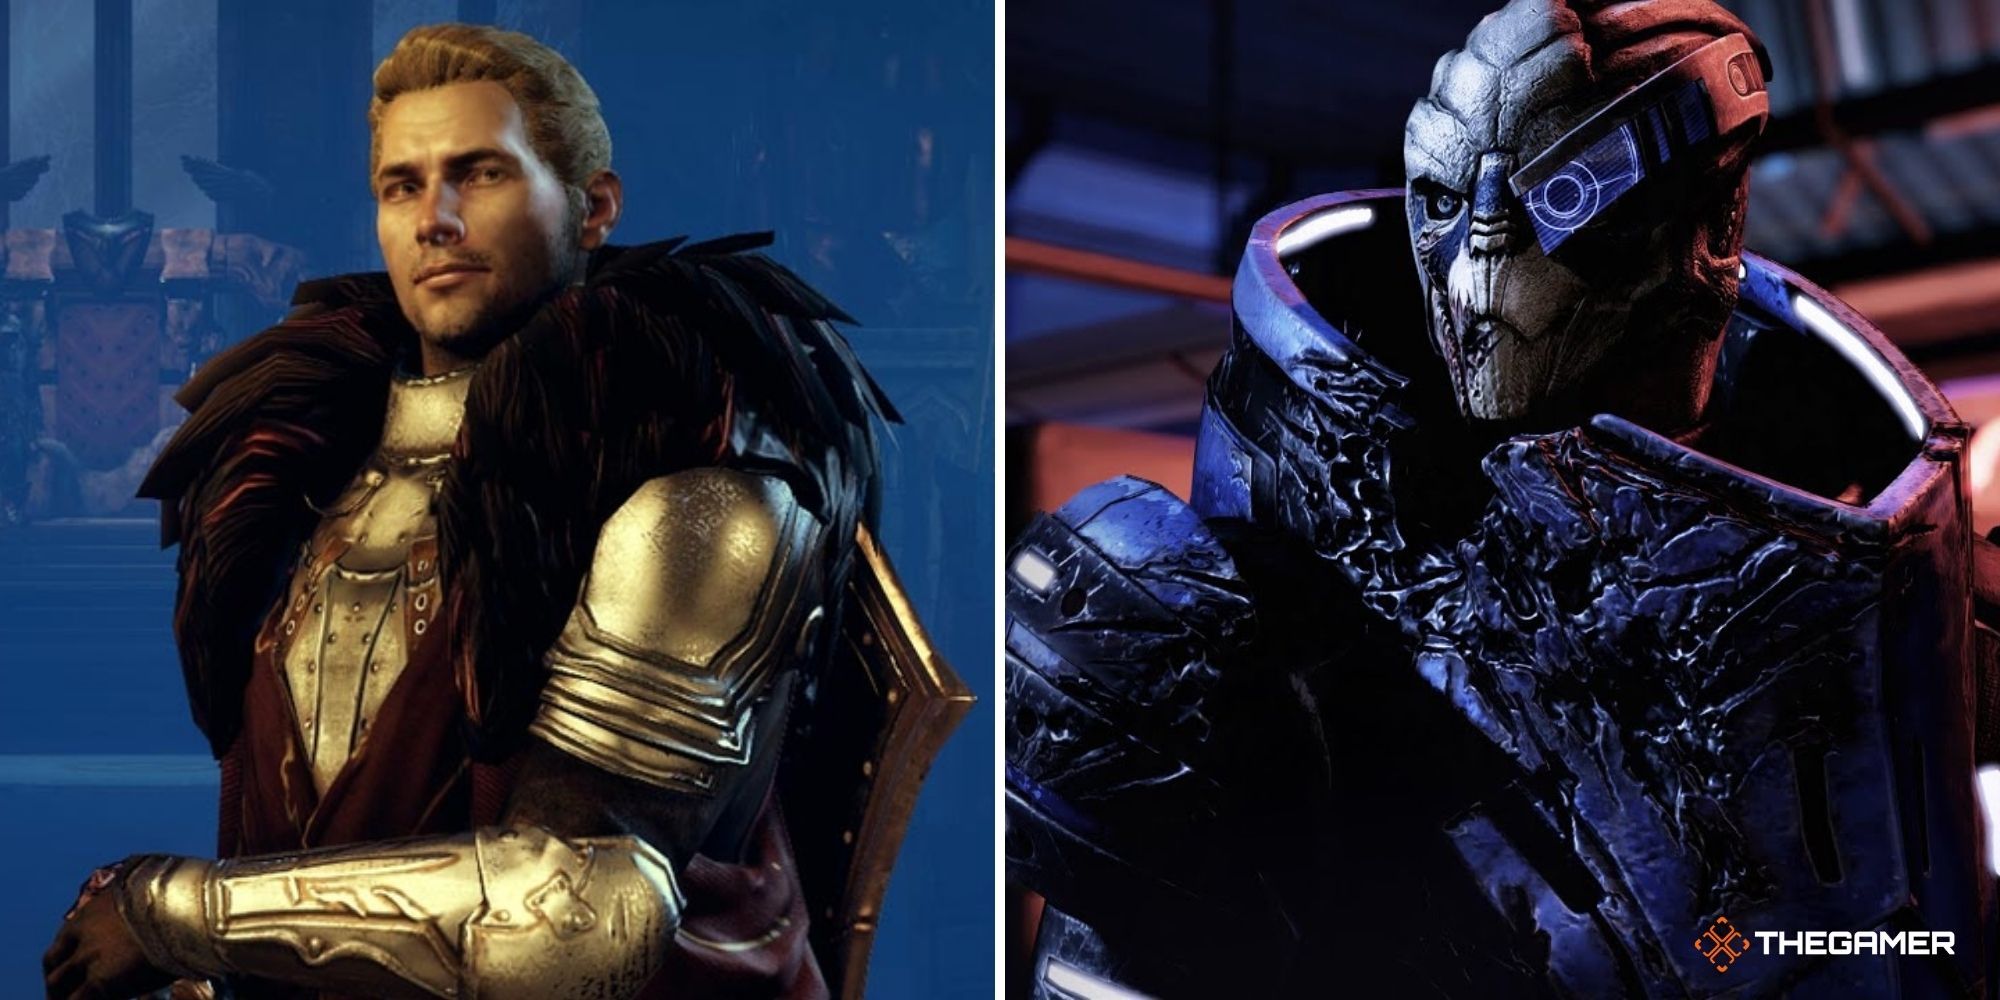 Cullen Rutherford from Dragon Age Inquisition (left), Garrus Vakarian from Dragon Age 3 (right)